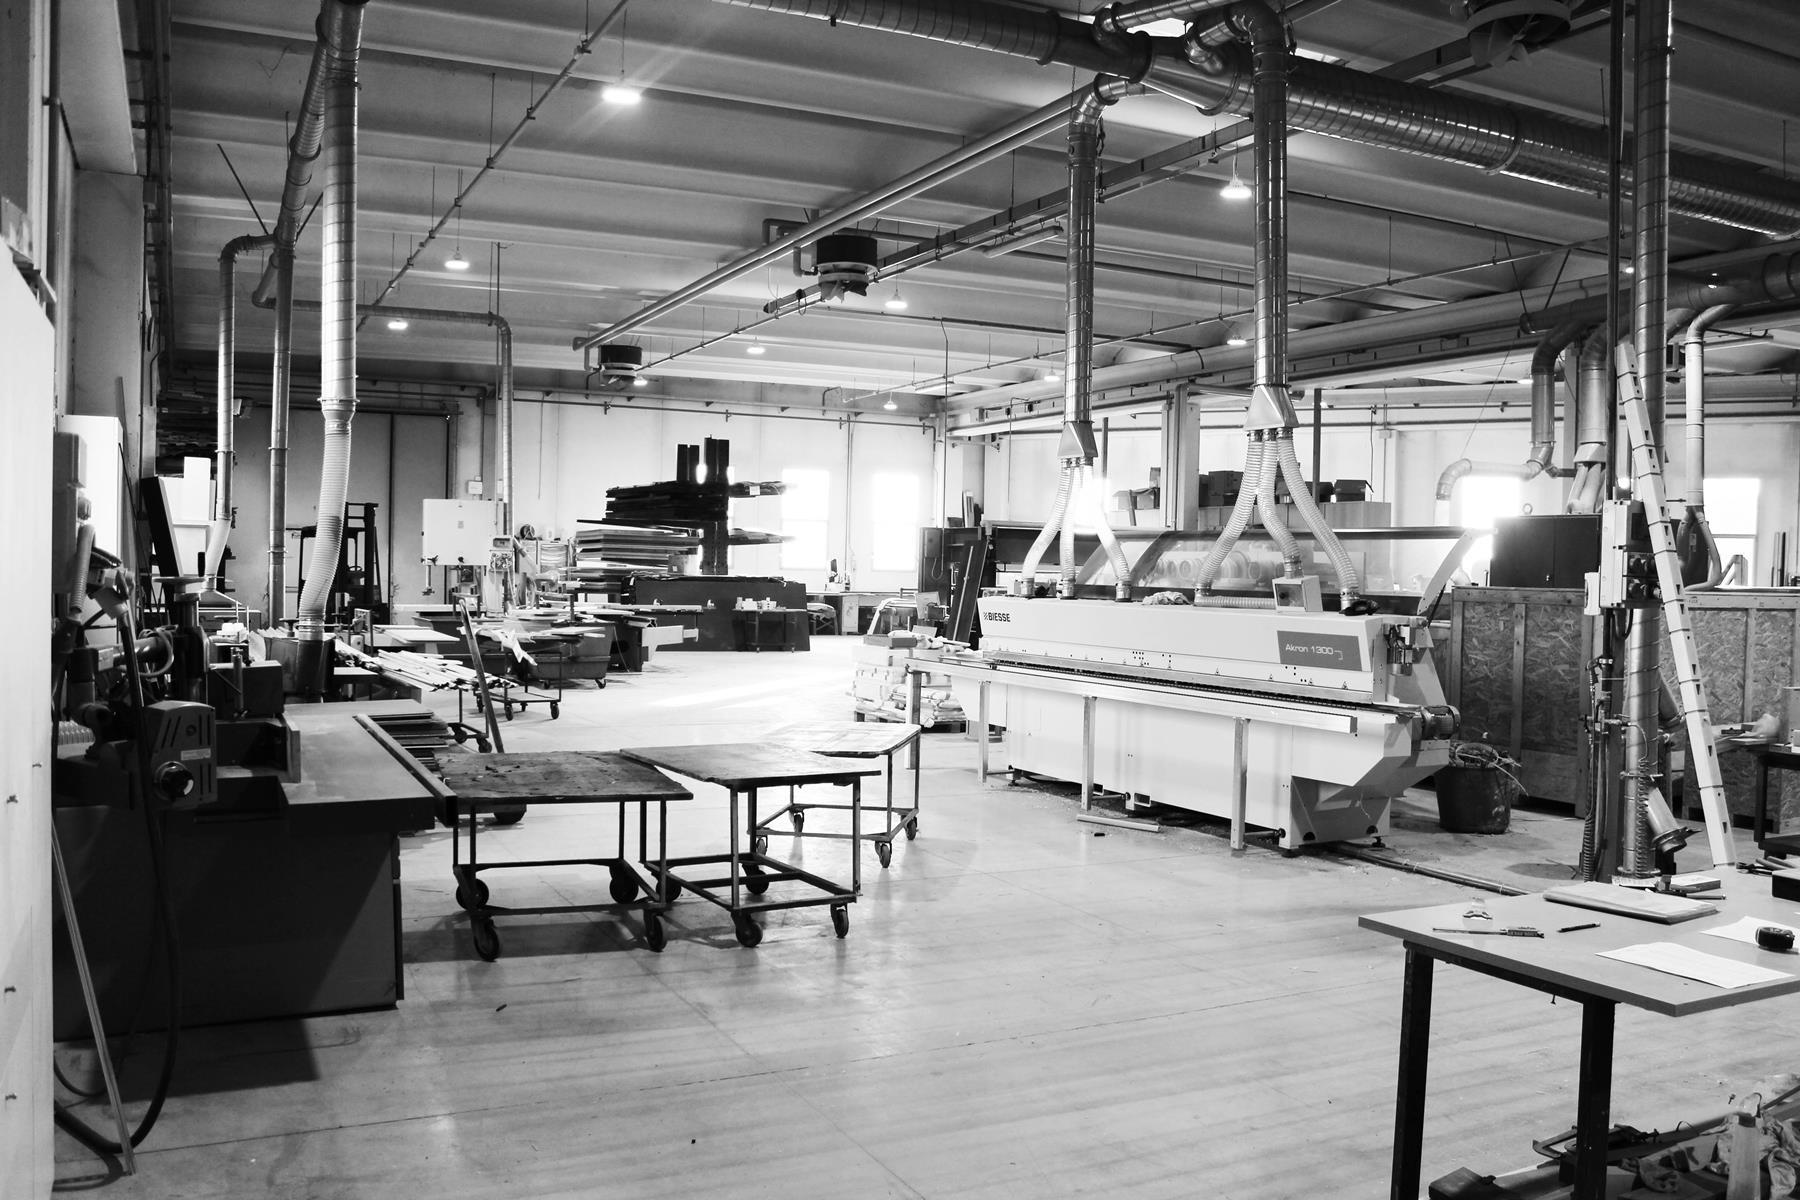 furniture production since 1850 - 8